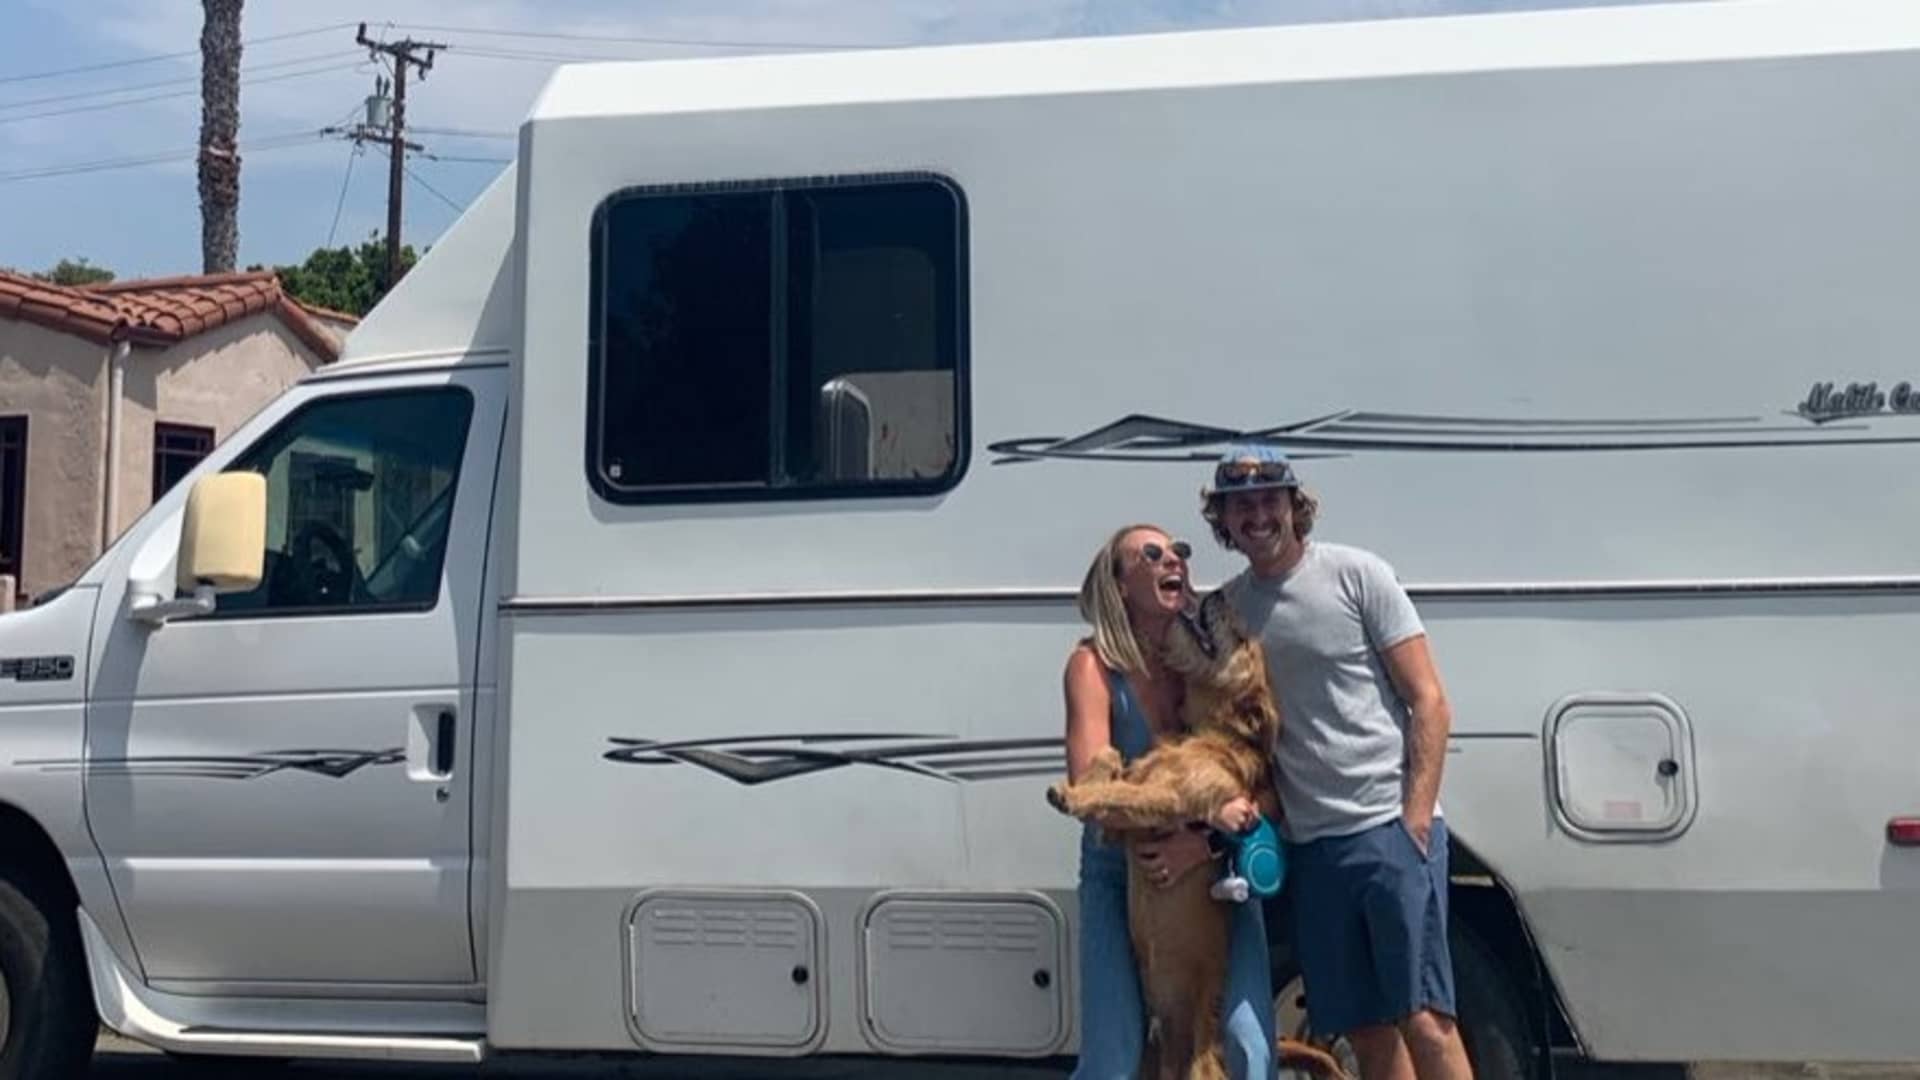 Thanks to his flexible streams of income, Michael Albaum and his wife spend part of the year living and traveling across the U.S. in their converted van.